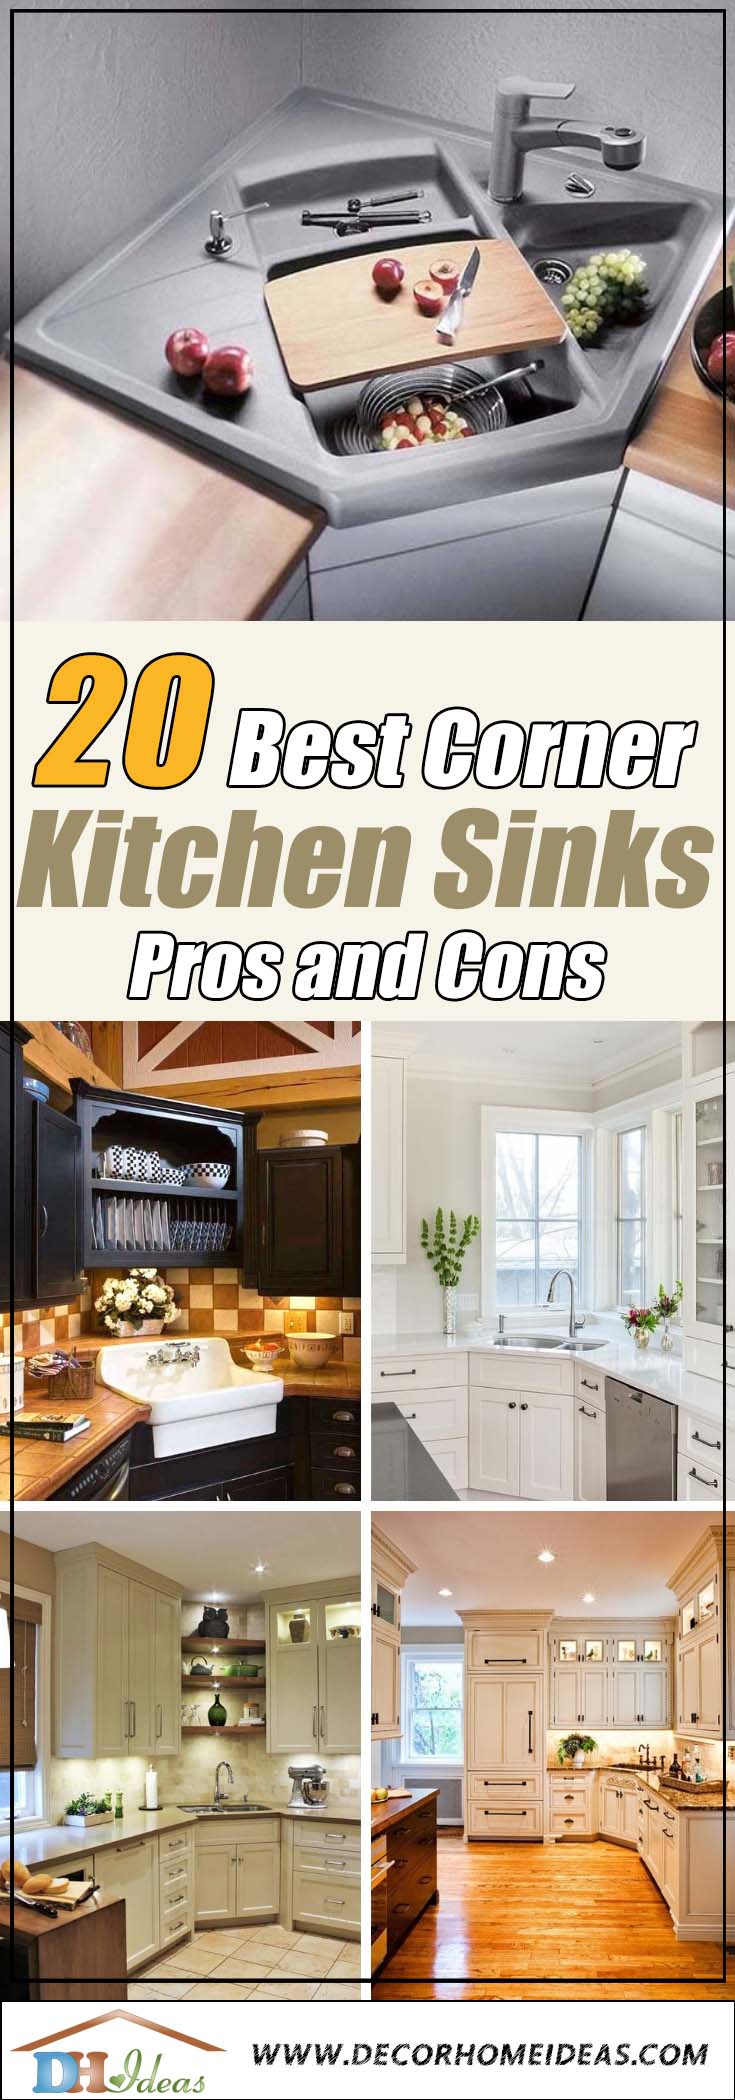 What you need to know about corner kitchen sink and how to choose the best one for your kitchen. Pros and cons with photos and explanations.